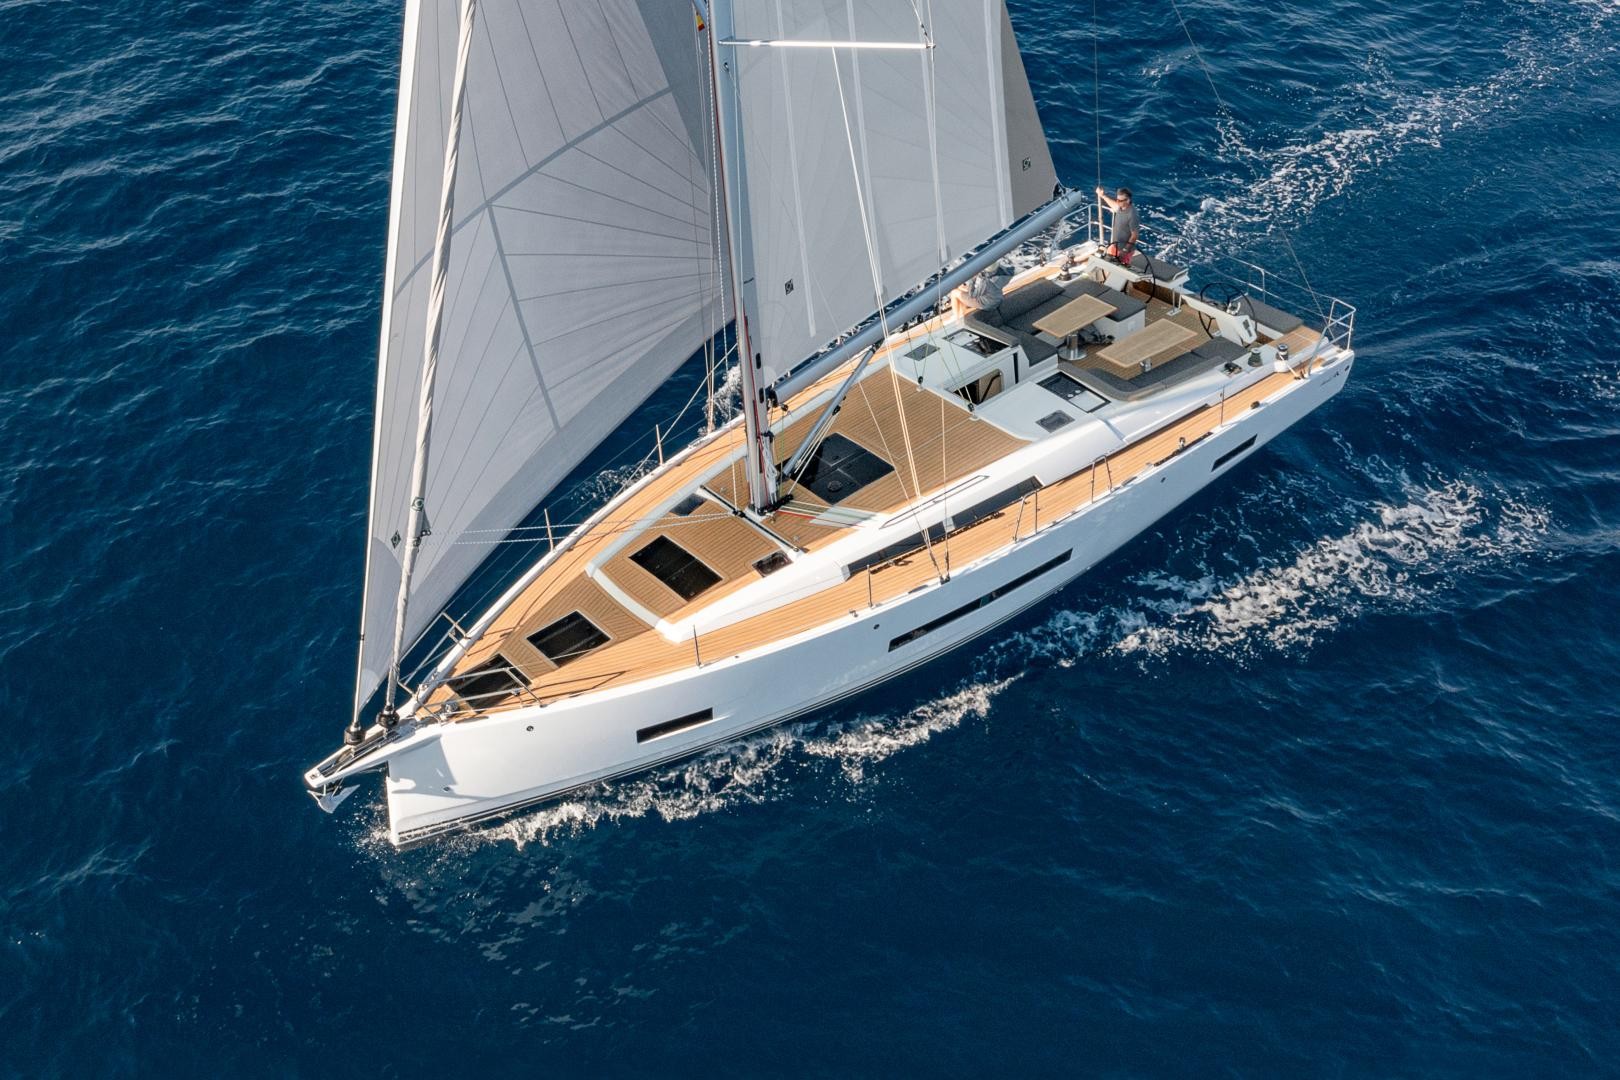 The Hanse 460 has been named European Yacht of the Year 2022